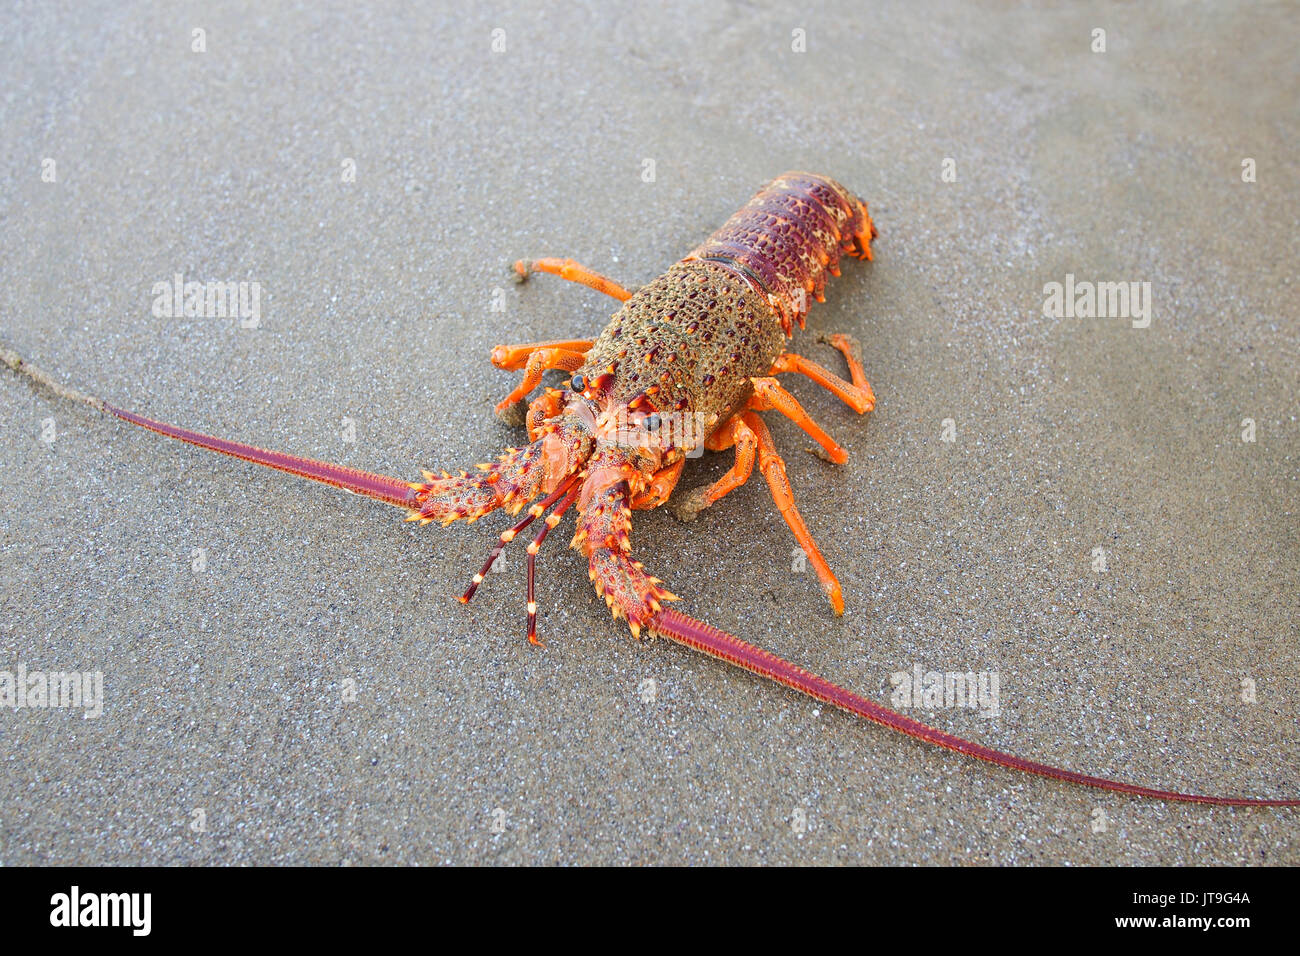 close-up on southern rock lobster on beach Stock Photo